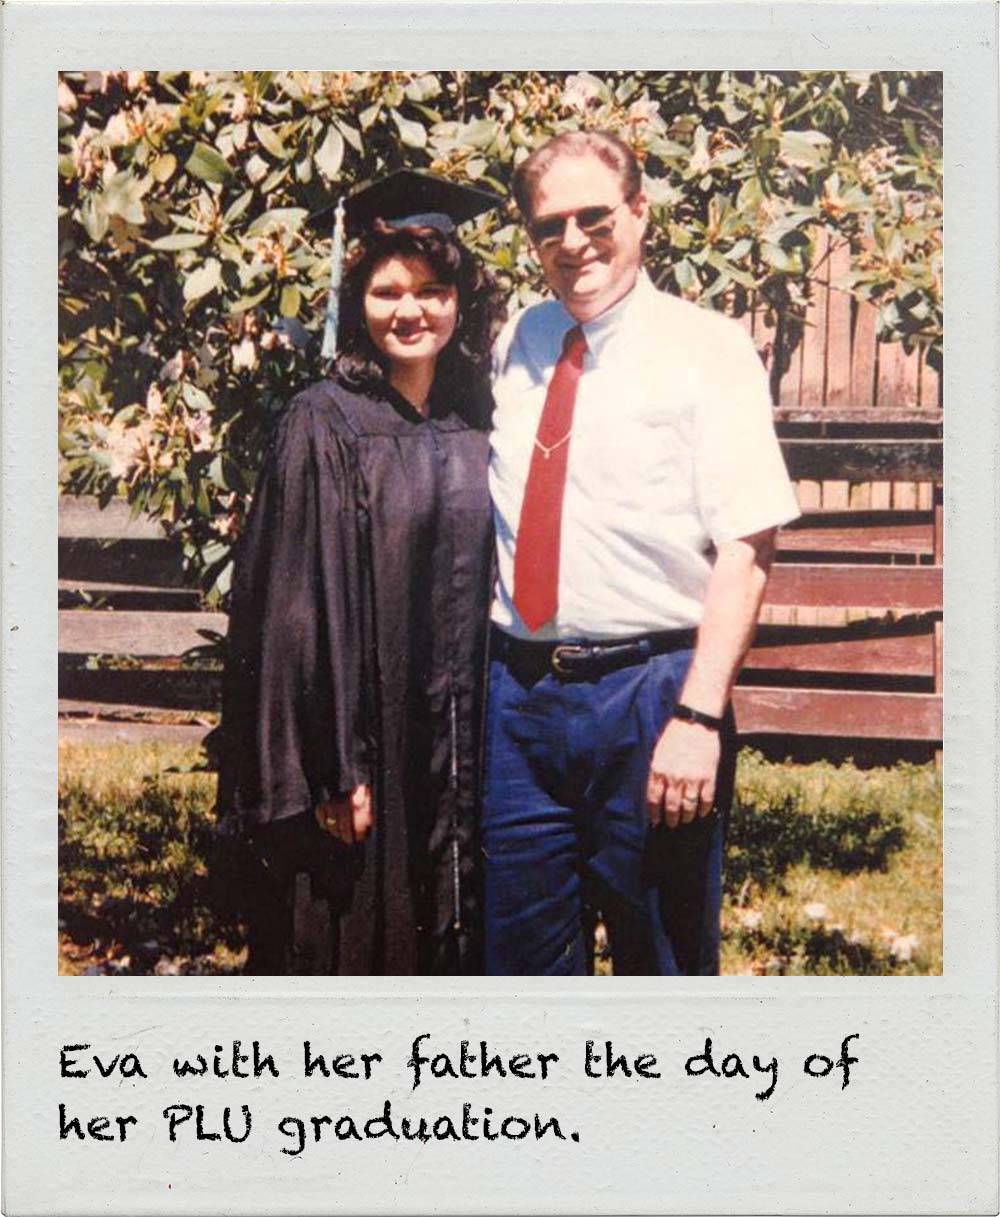 Eva with her father the day of her PLU graduation.